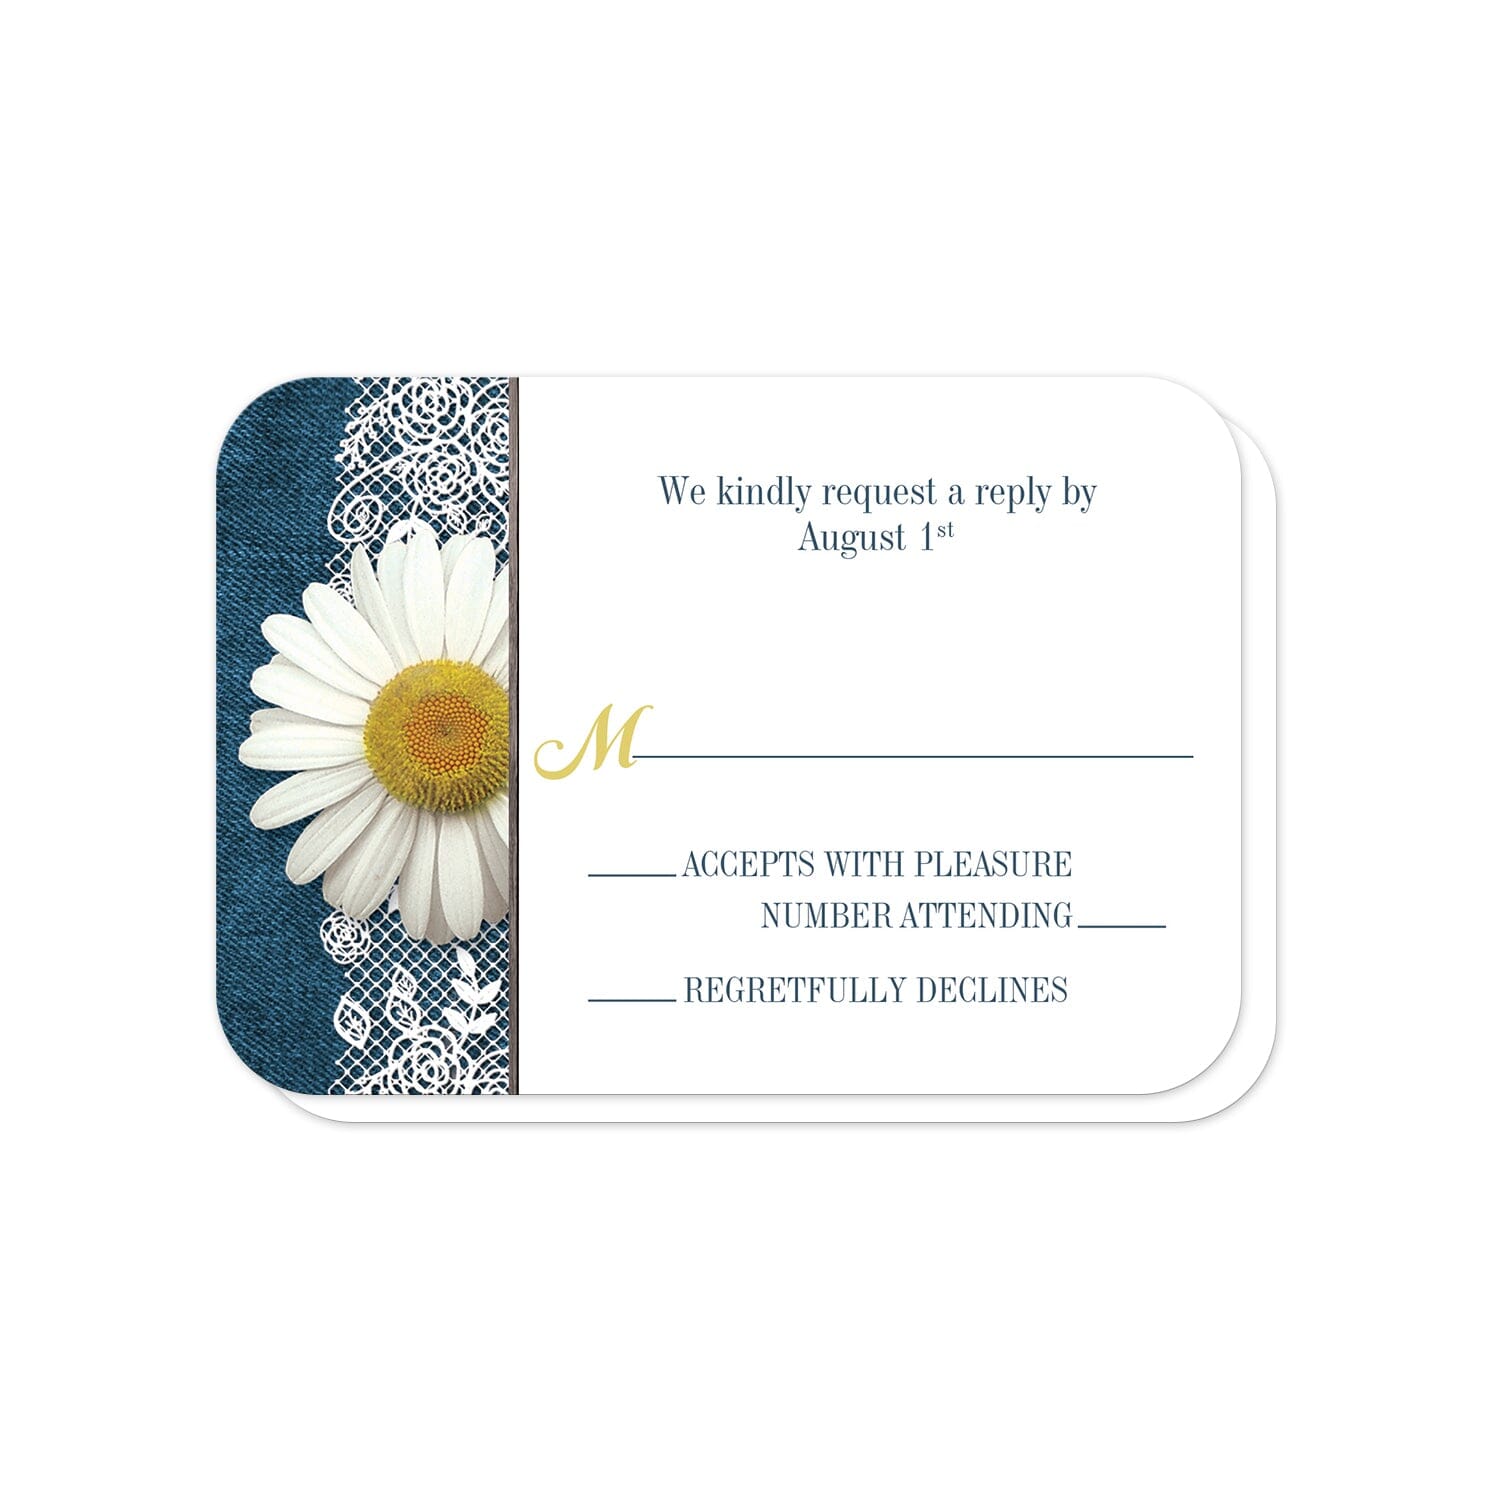 Daisy Denim and Lace I Do BBQ RSVP Cards (with rounded corners) at Artistically Invited.